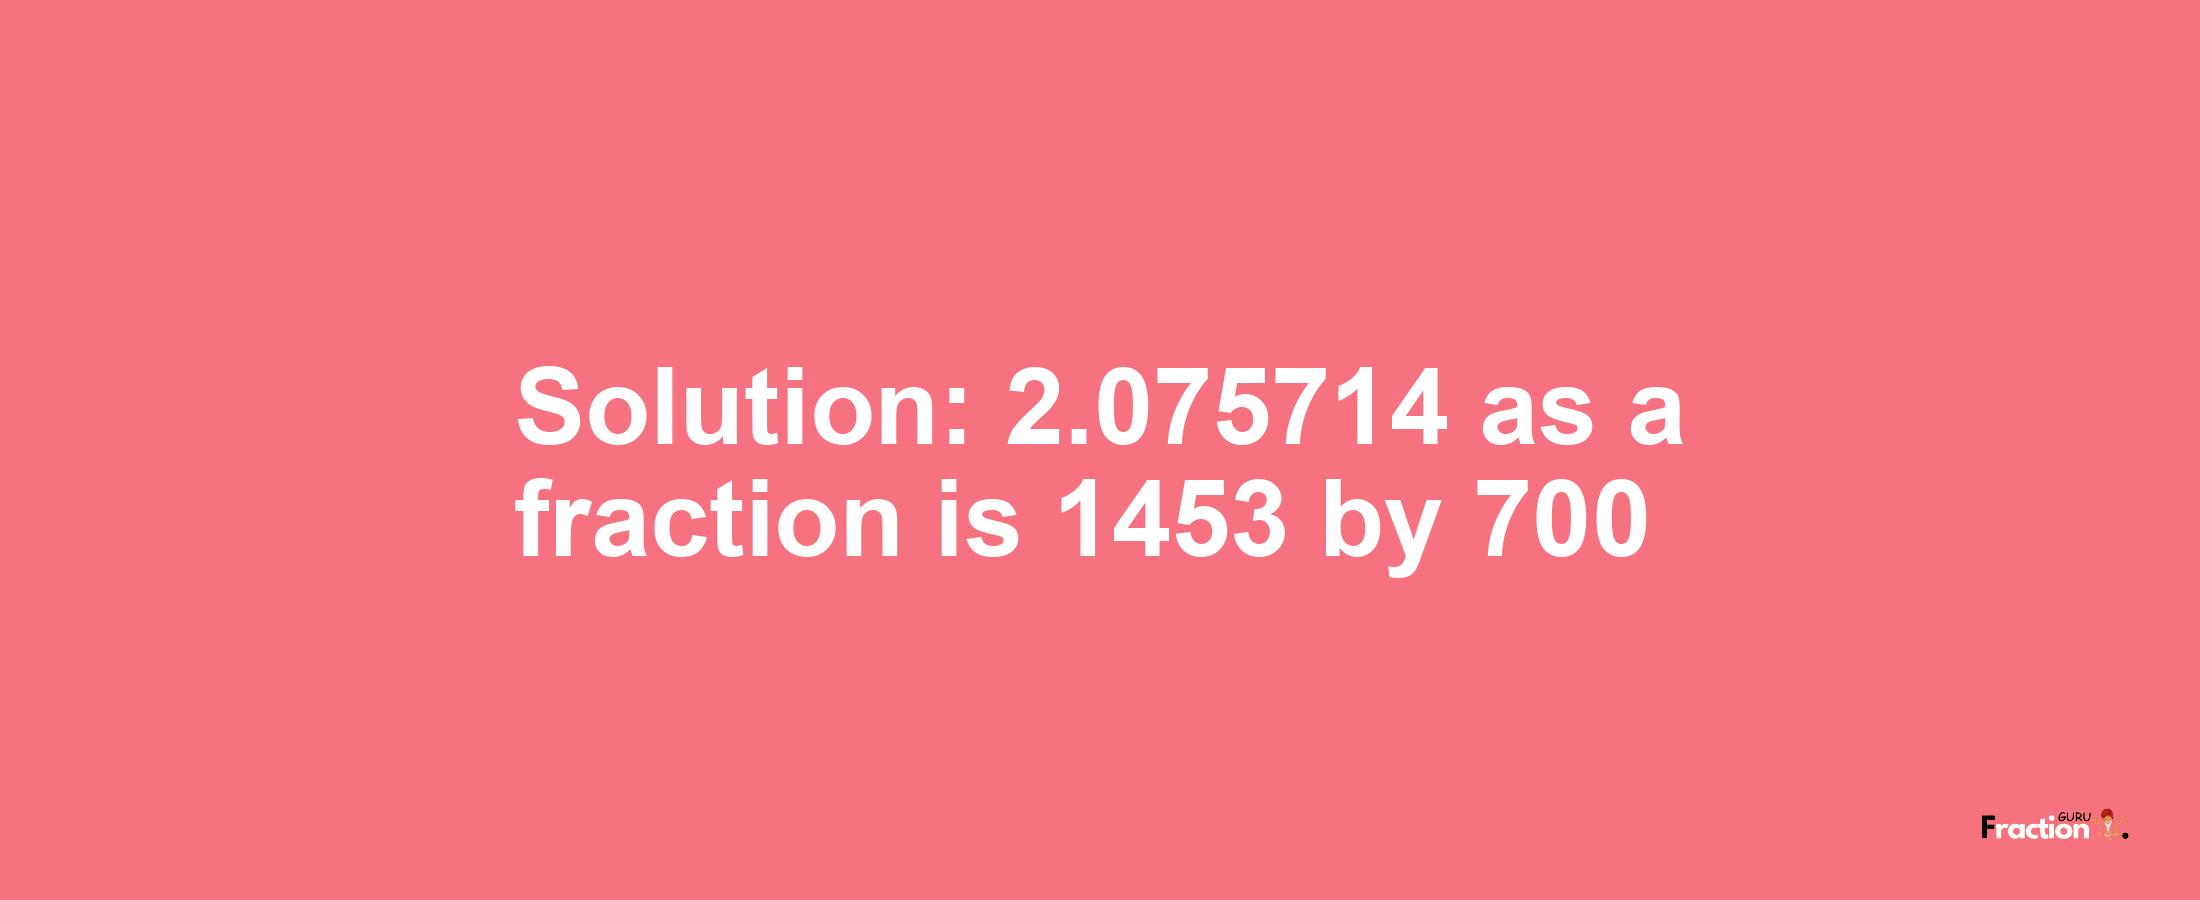 Solution:2.075714 as a fraction is 1453/700